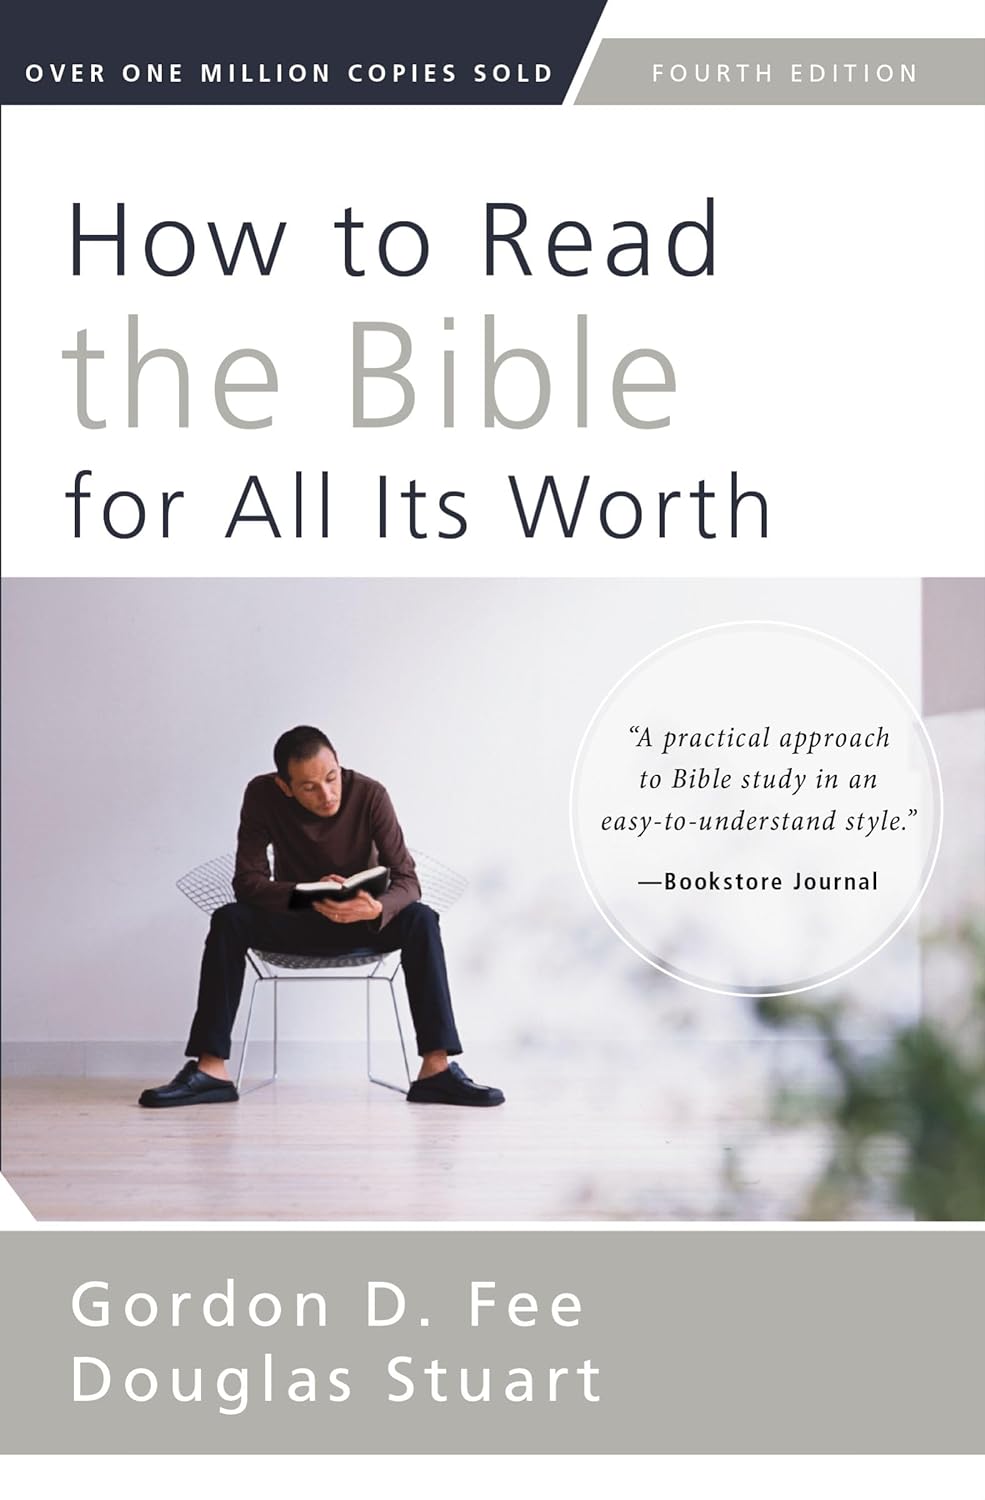 How to Read the Bible for All Its Worth: Fourth Edition